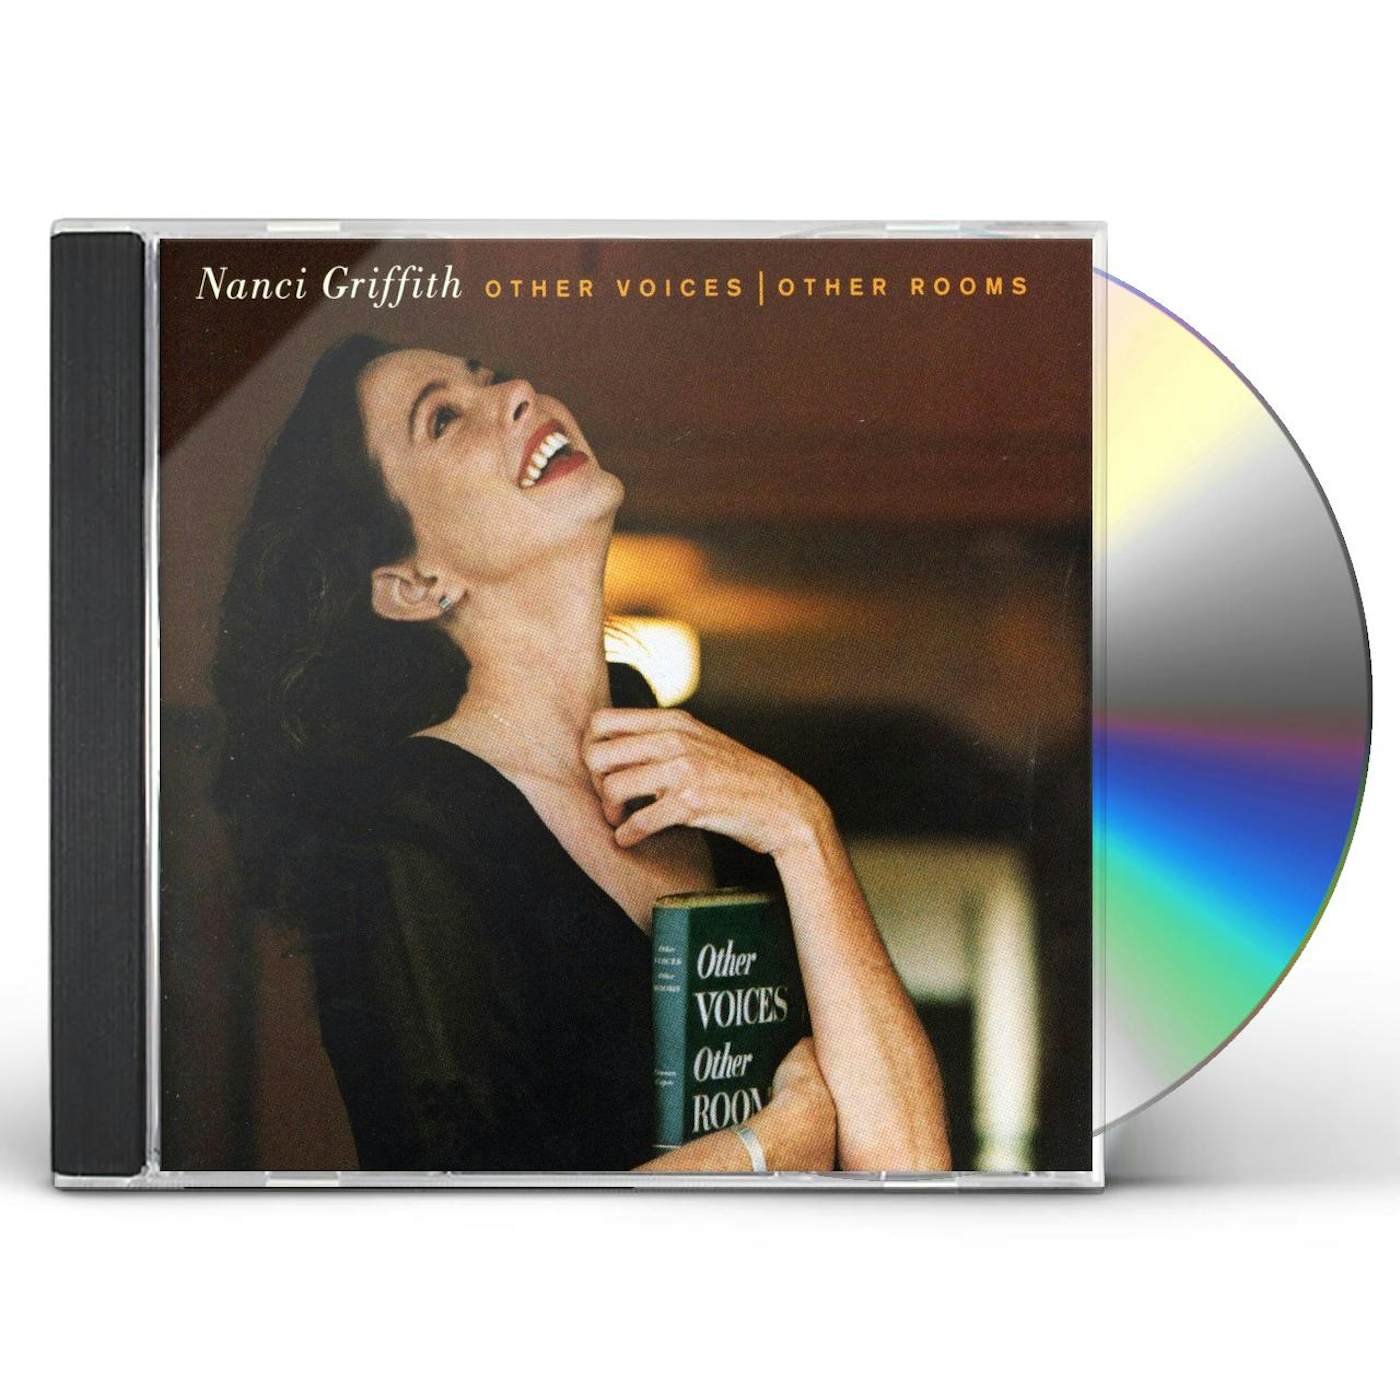 Nanci Griffith OTHER VOICES OTHER ROOMS CD